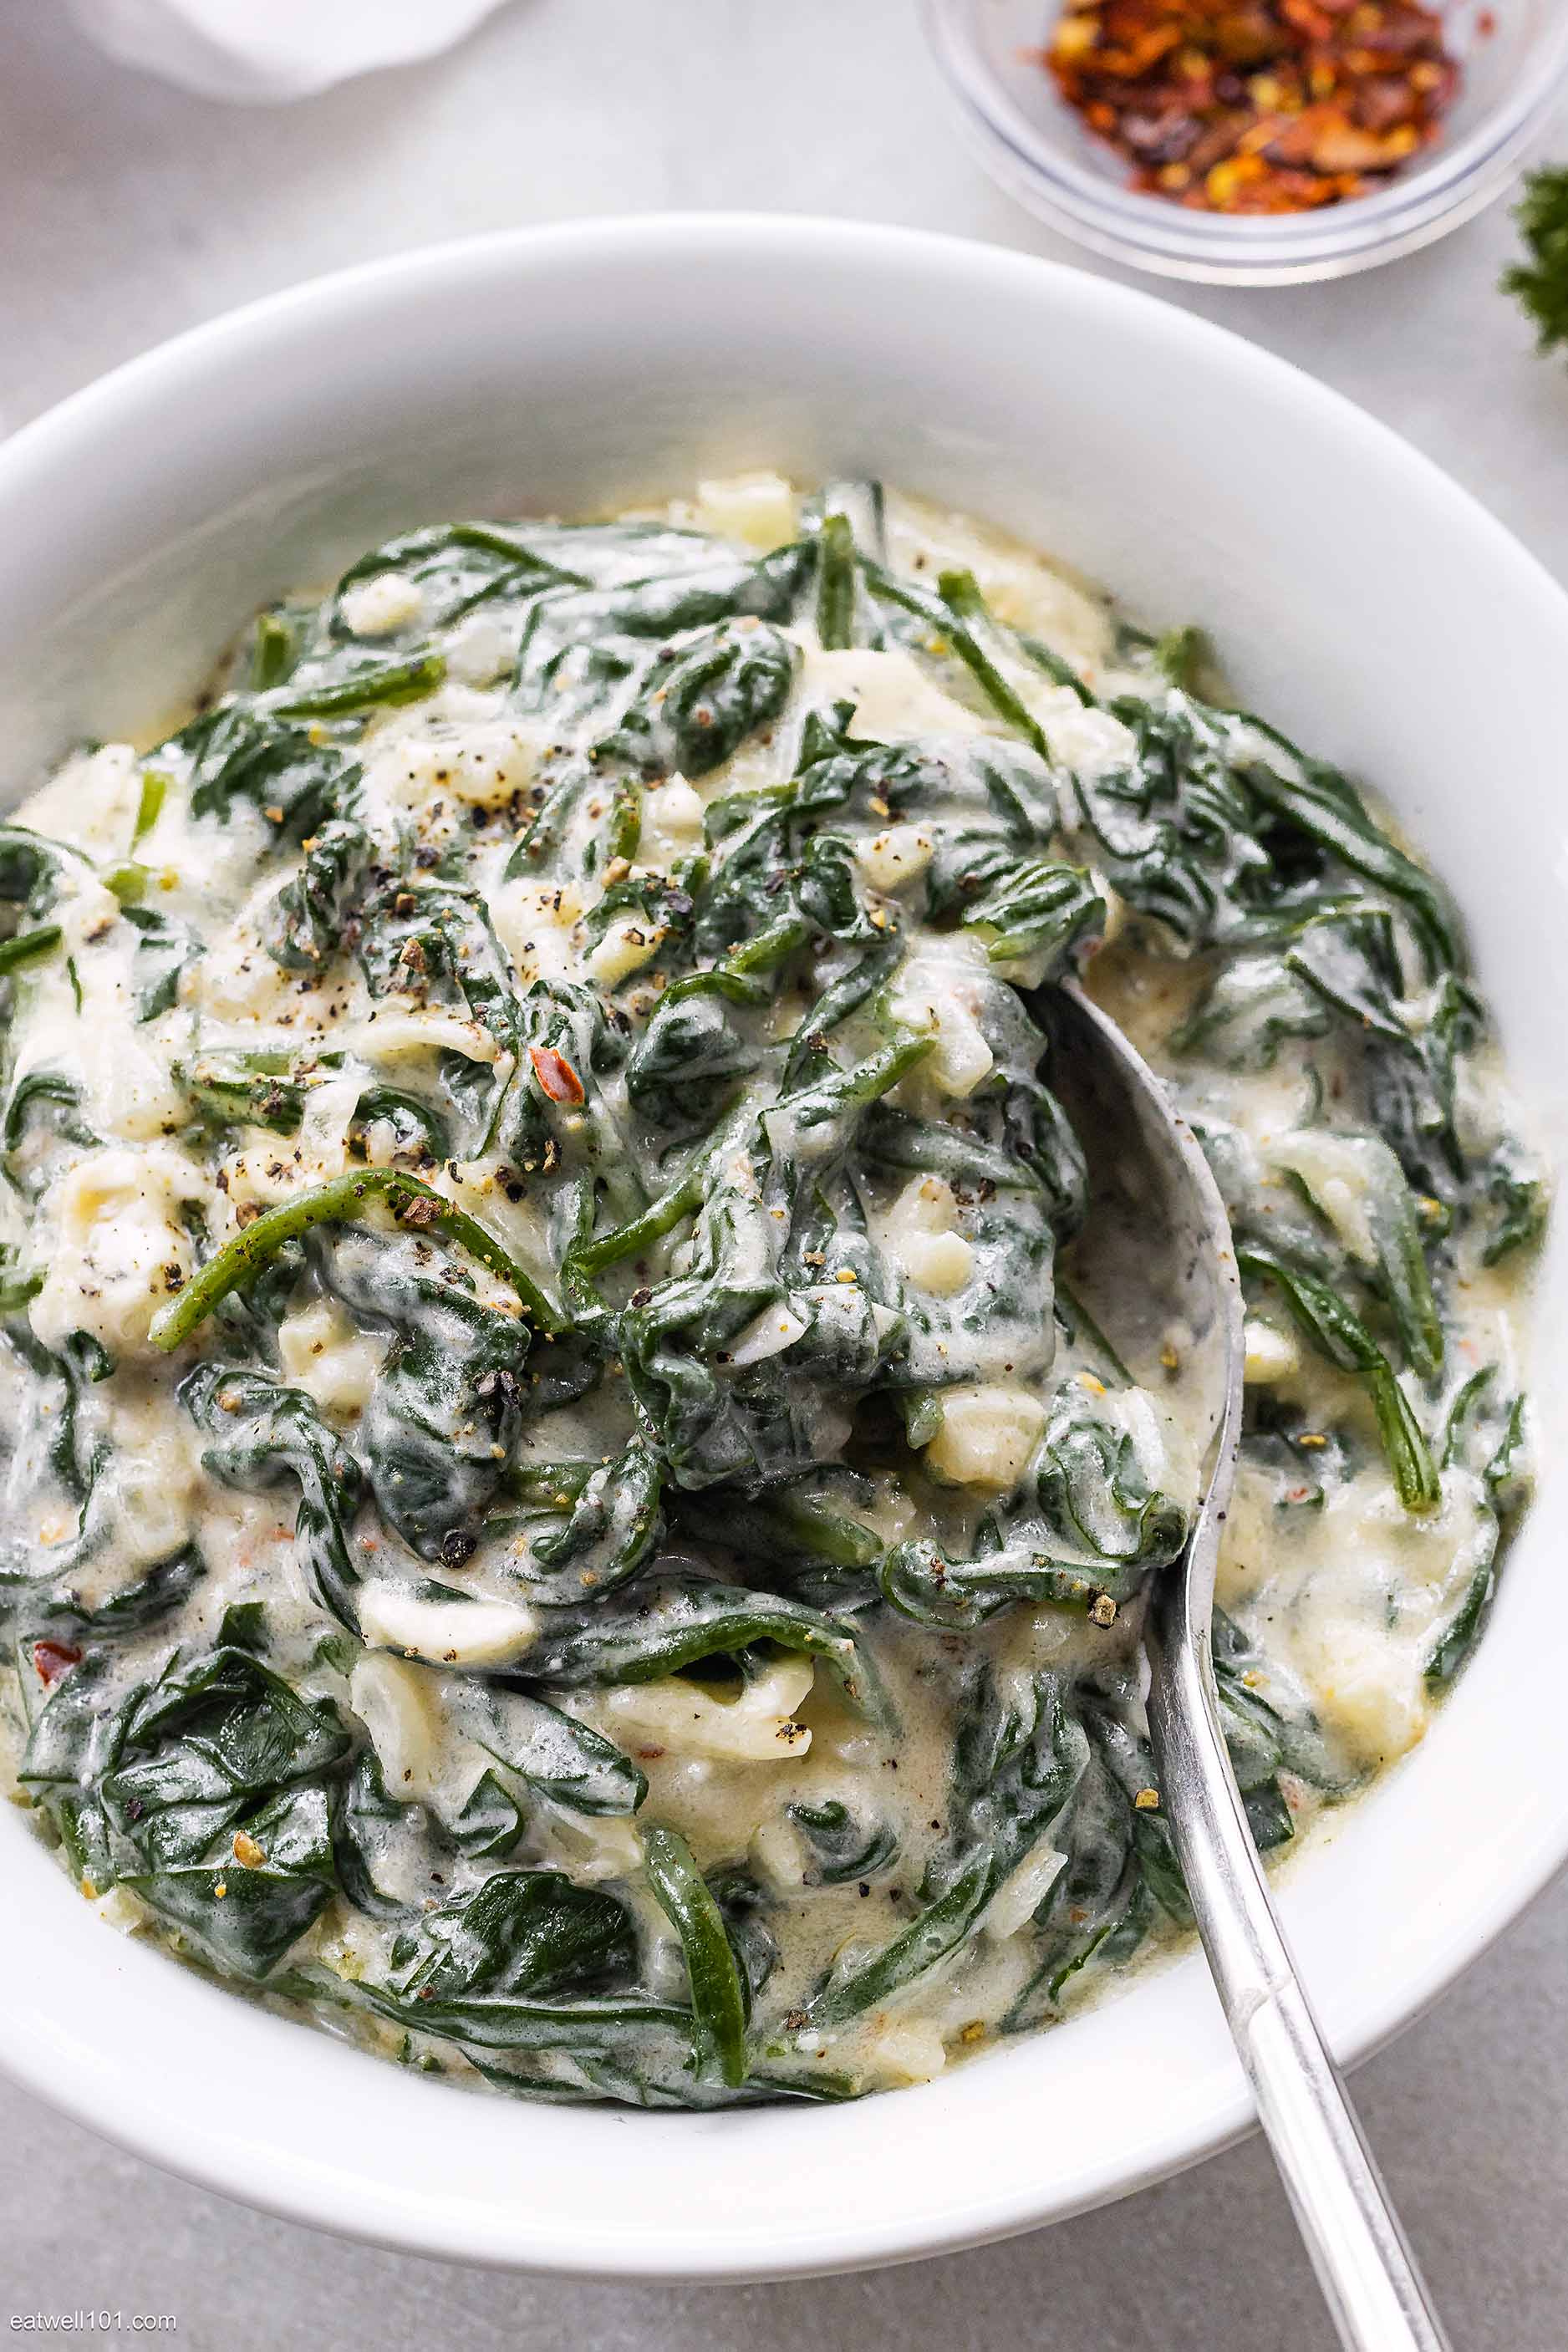 Creamed Spinach - #recipe by #eatwell101 - https://www.eatwell101.com/creamed-spinach-recipe